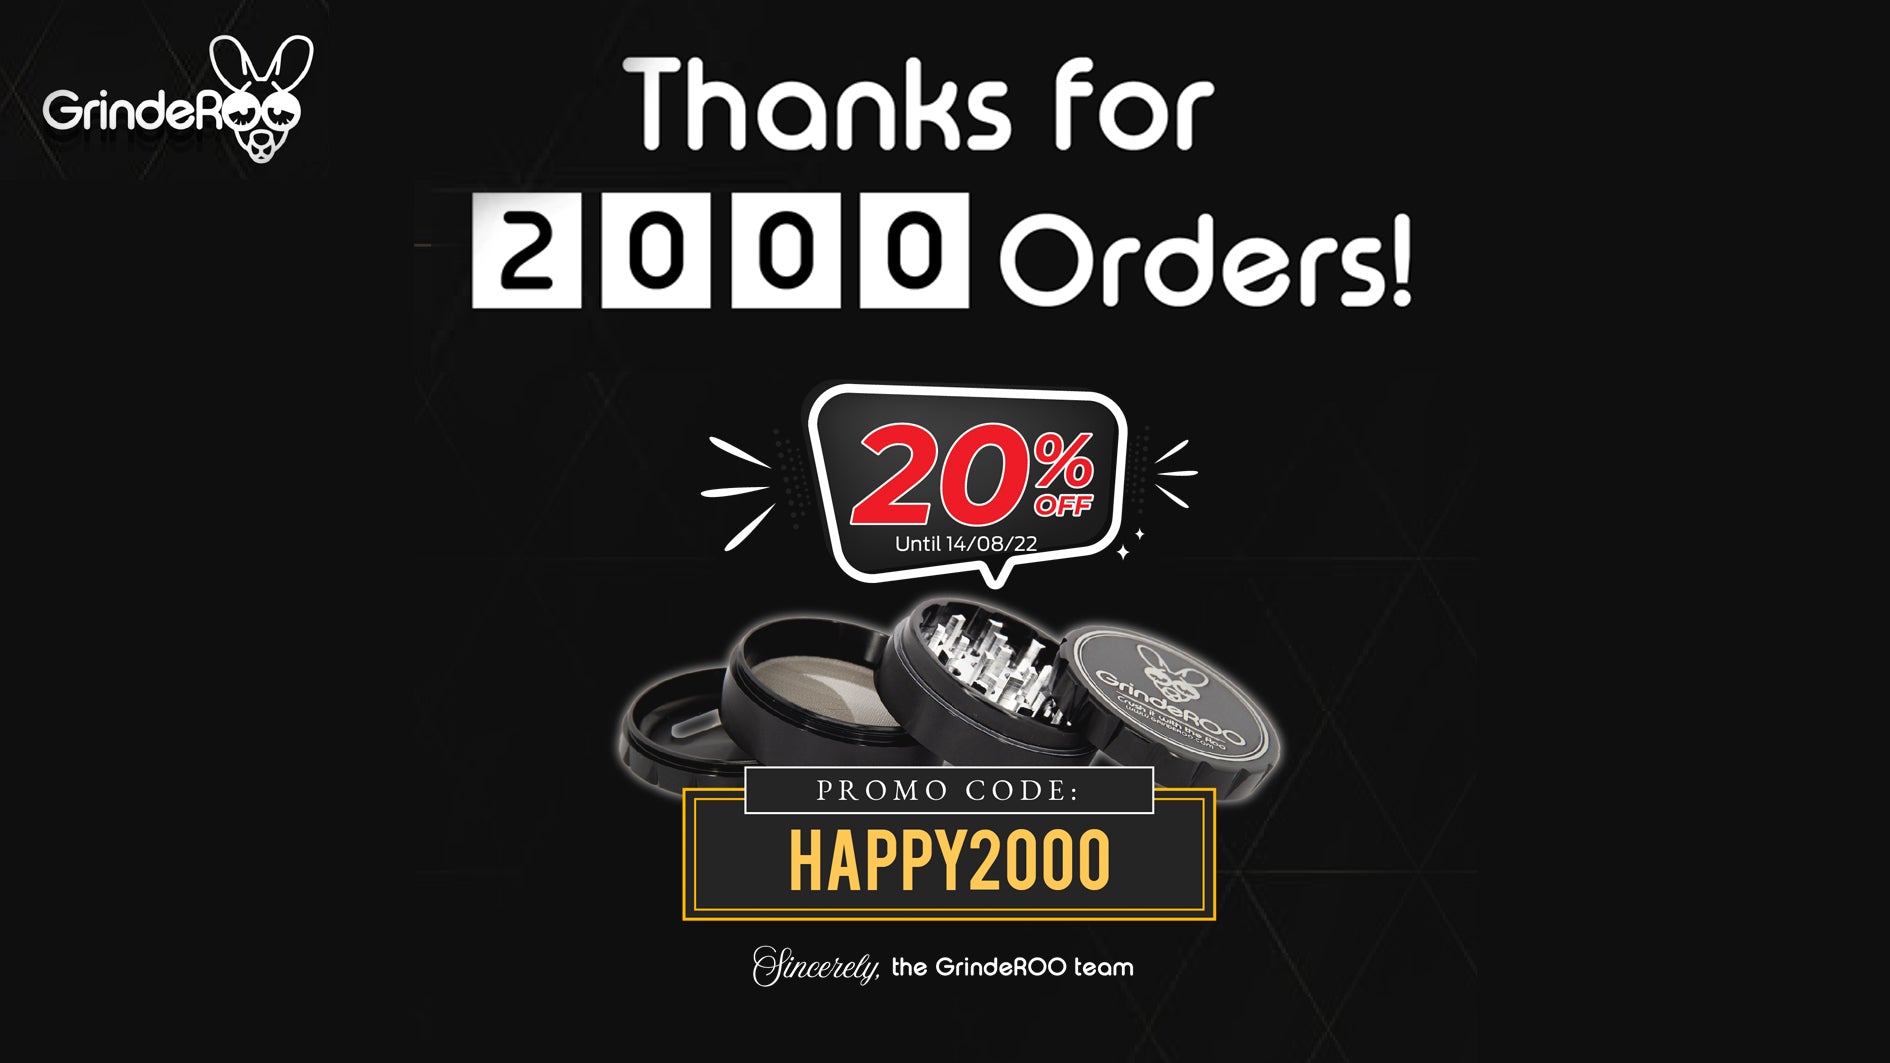 As a Thanks for 2000 Orders, Use Code HAPPY2000 for 20% Off!